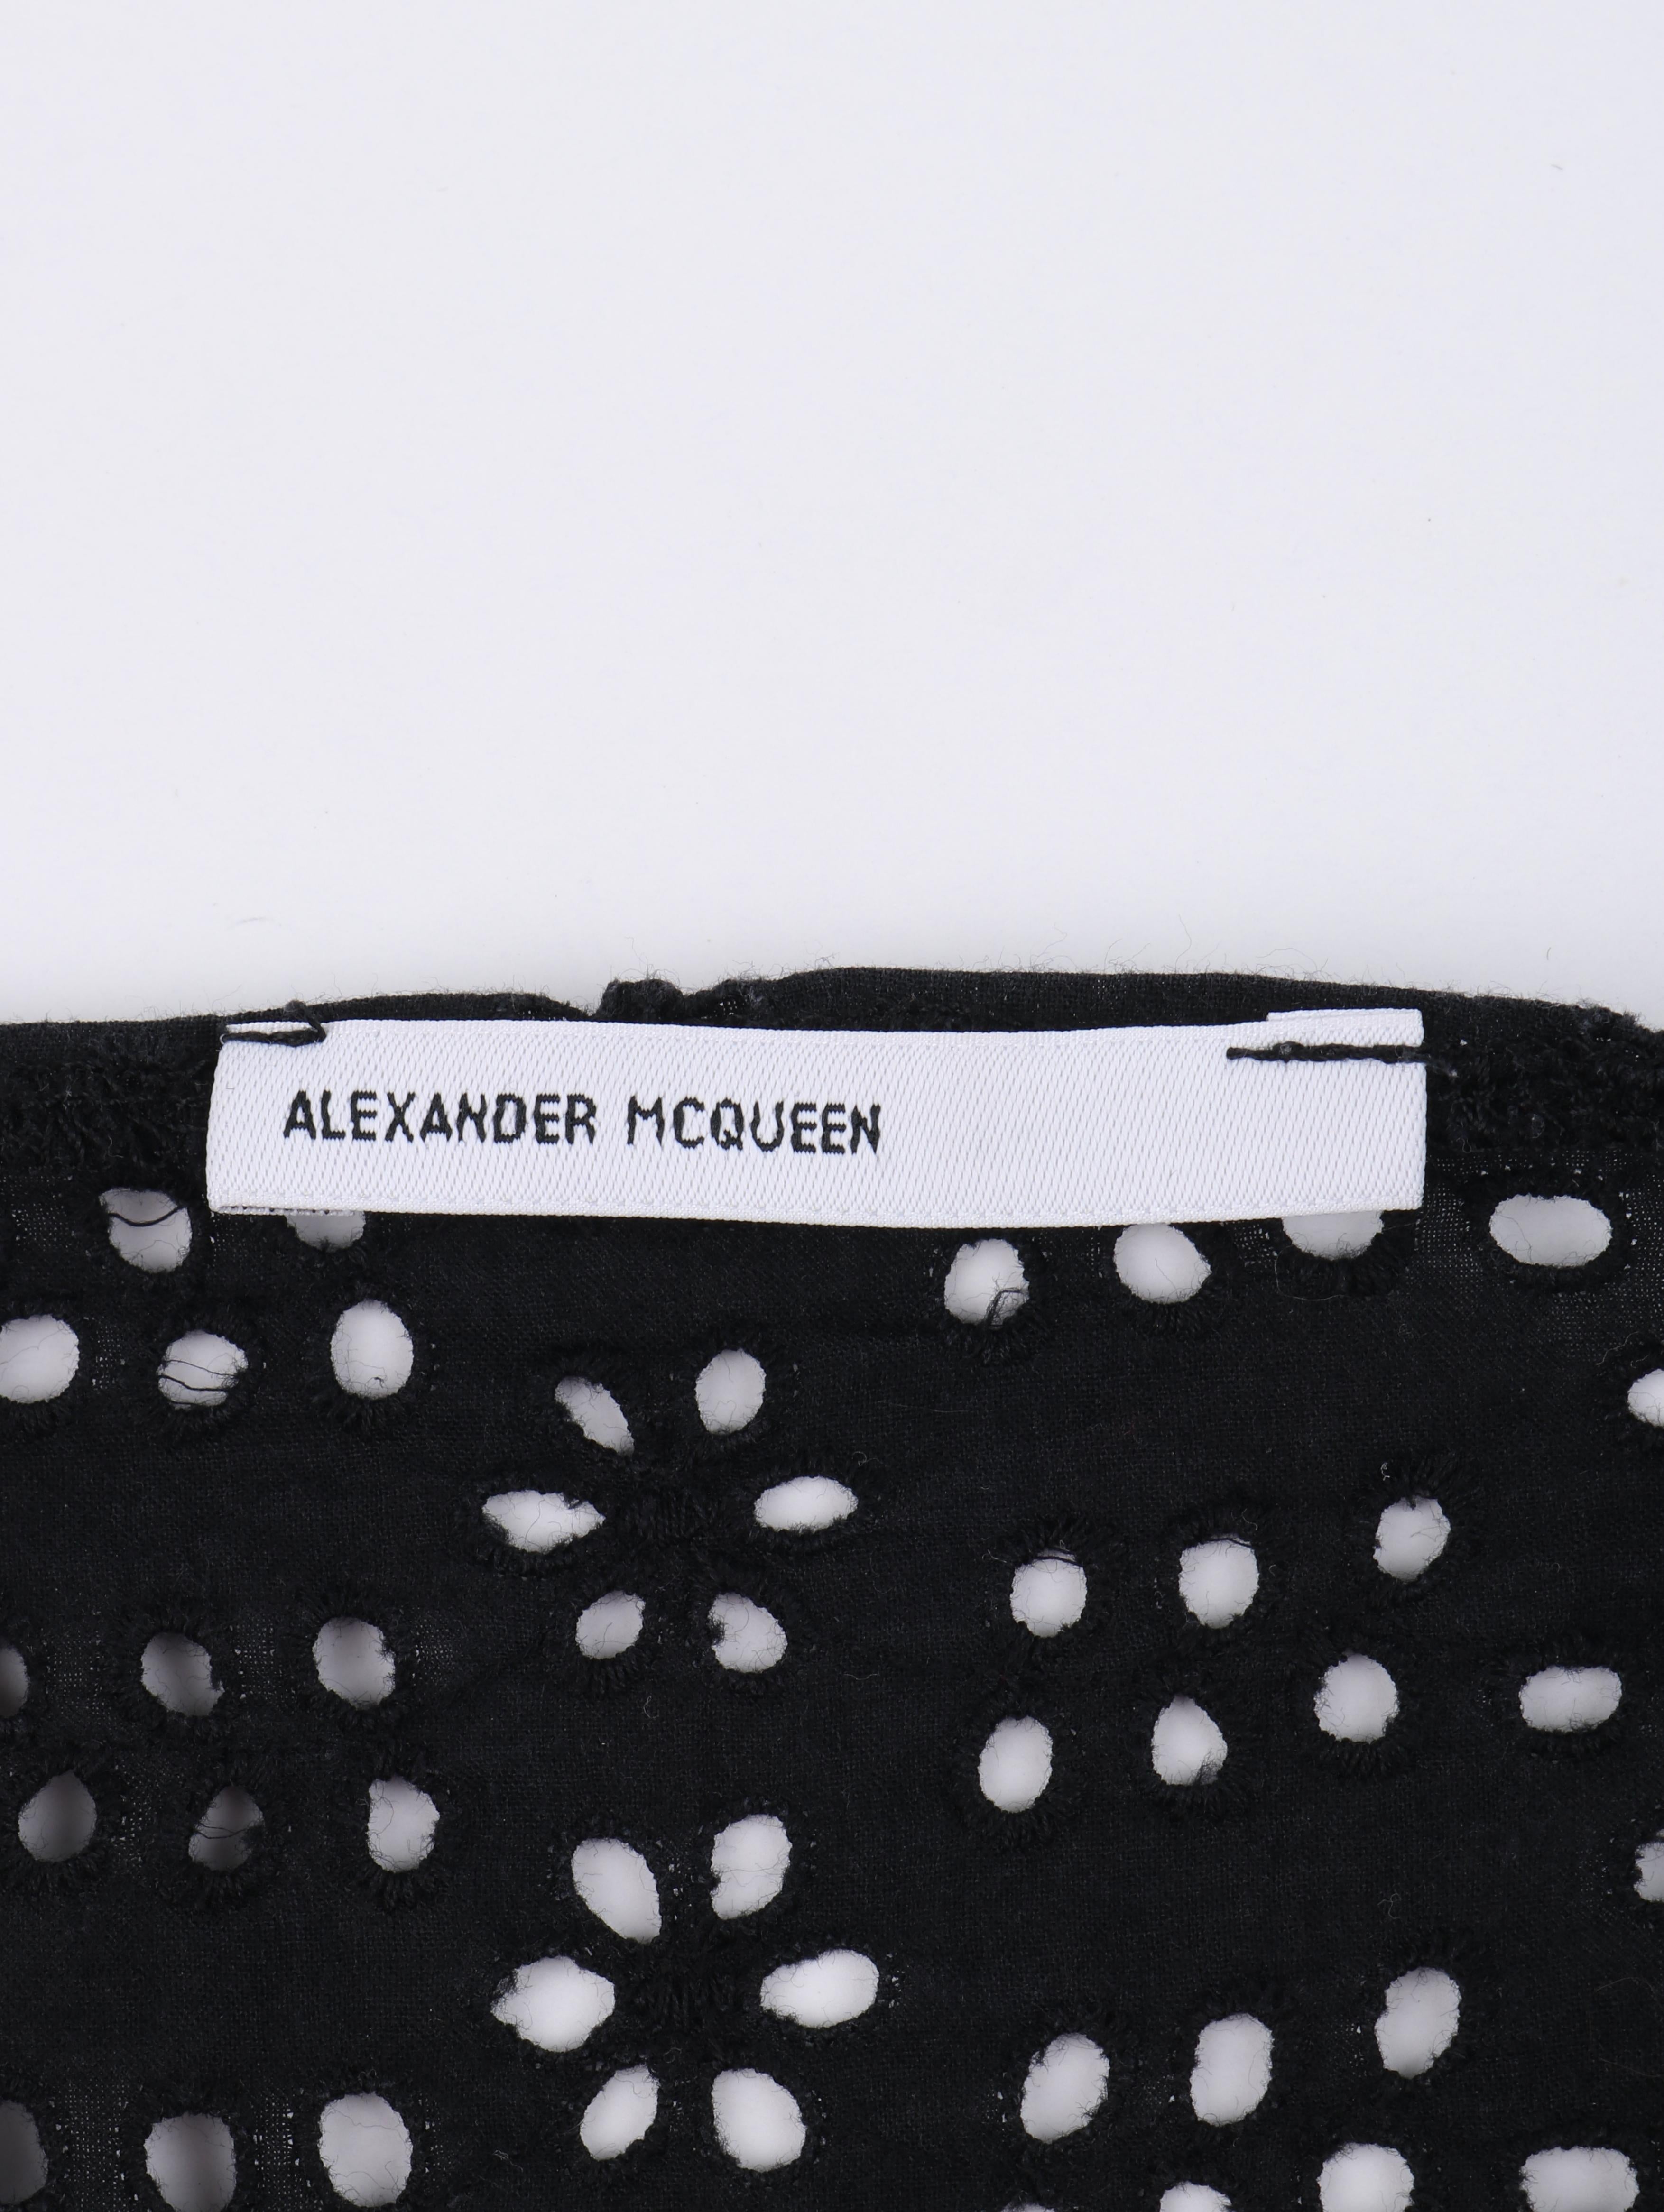 ALEXANDER McQUEEN S/S 1996 “The Hunger” Black Eyelet Leopard Chiffon Blouse Top For Sale 3